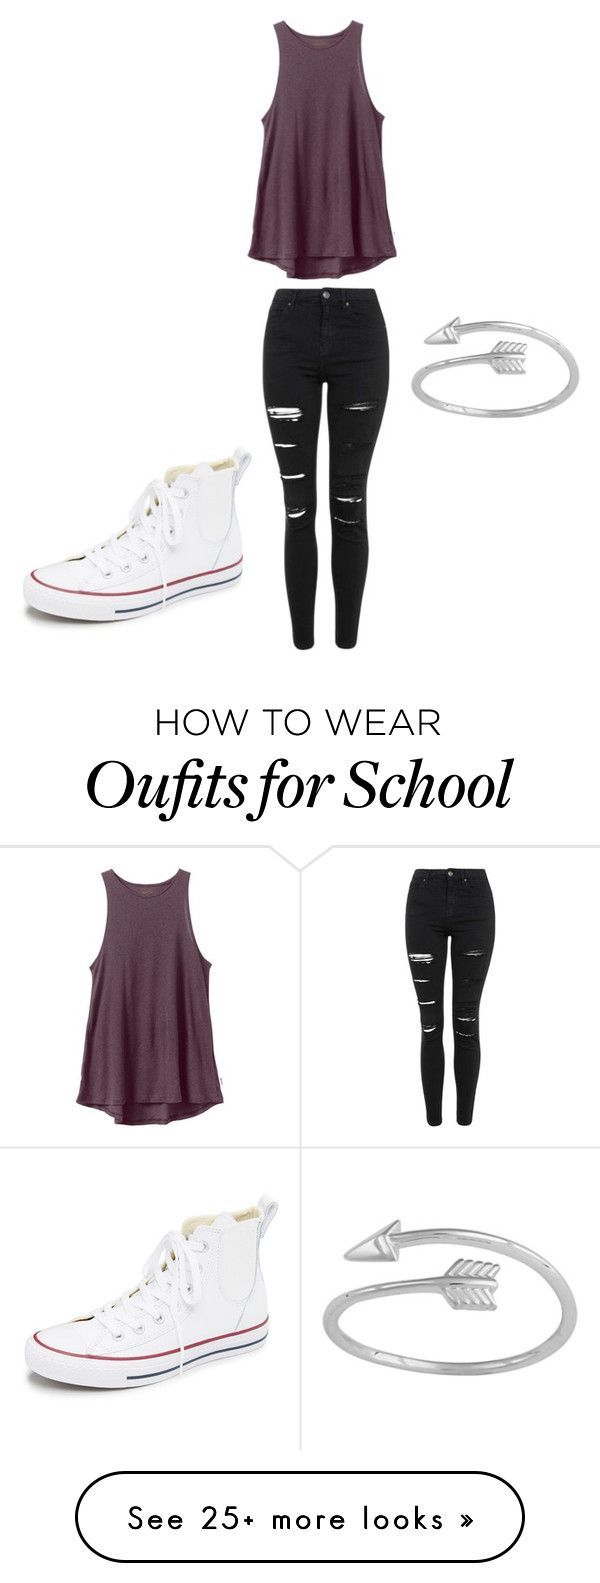 “Casual school” by mirornelas on Polyvore featuring RVCA, Topshop, Conve